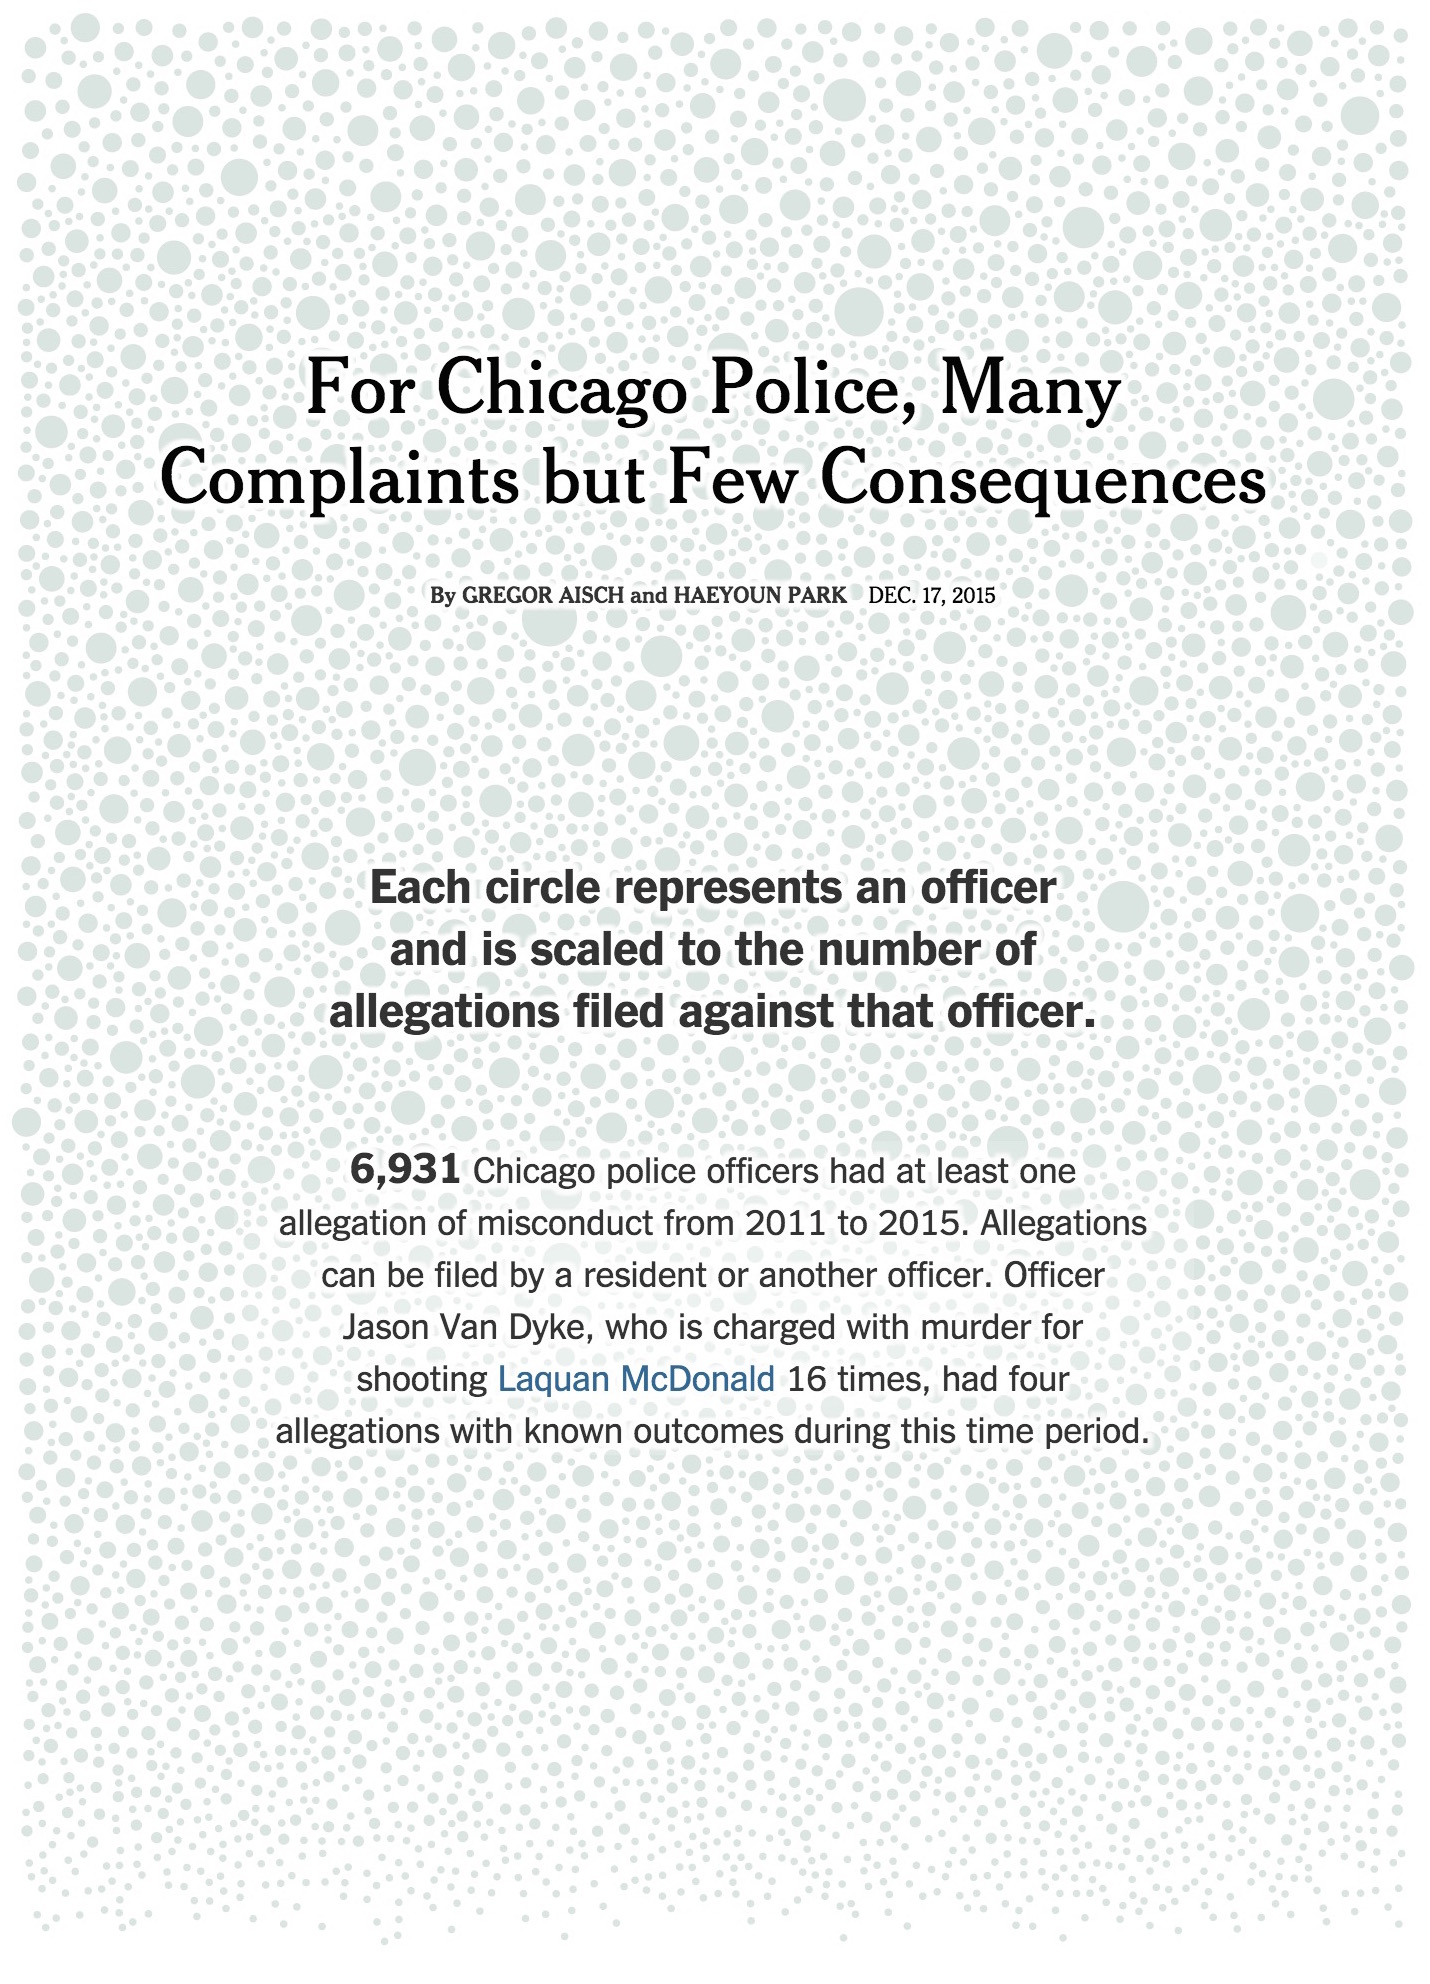 For Chicago Police, Many Complaints but Few Consequences<br>